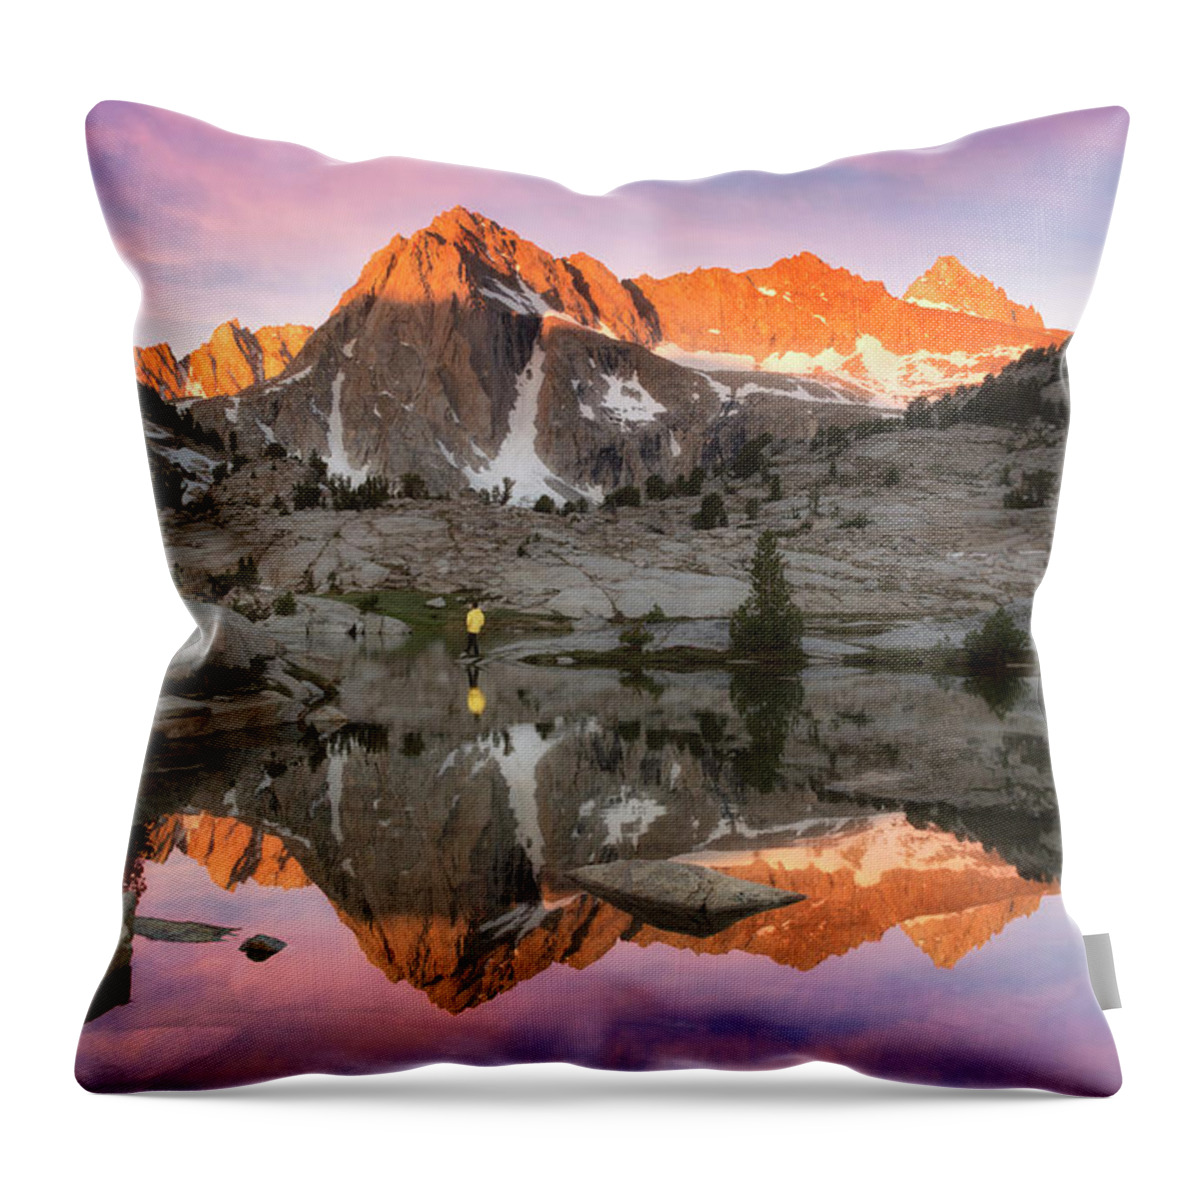 Sunrise Throw Pillow featuring the photograph Mountain Air by Nicki Frates